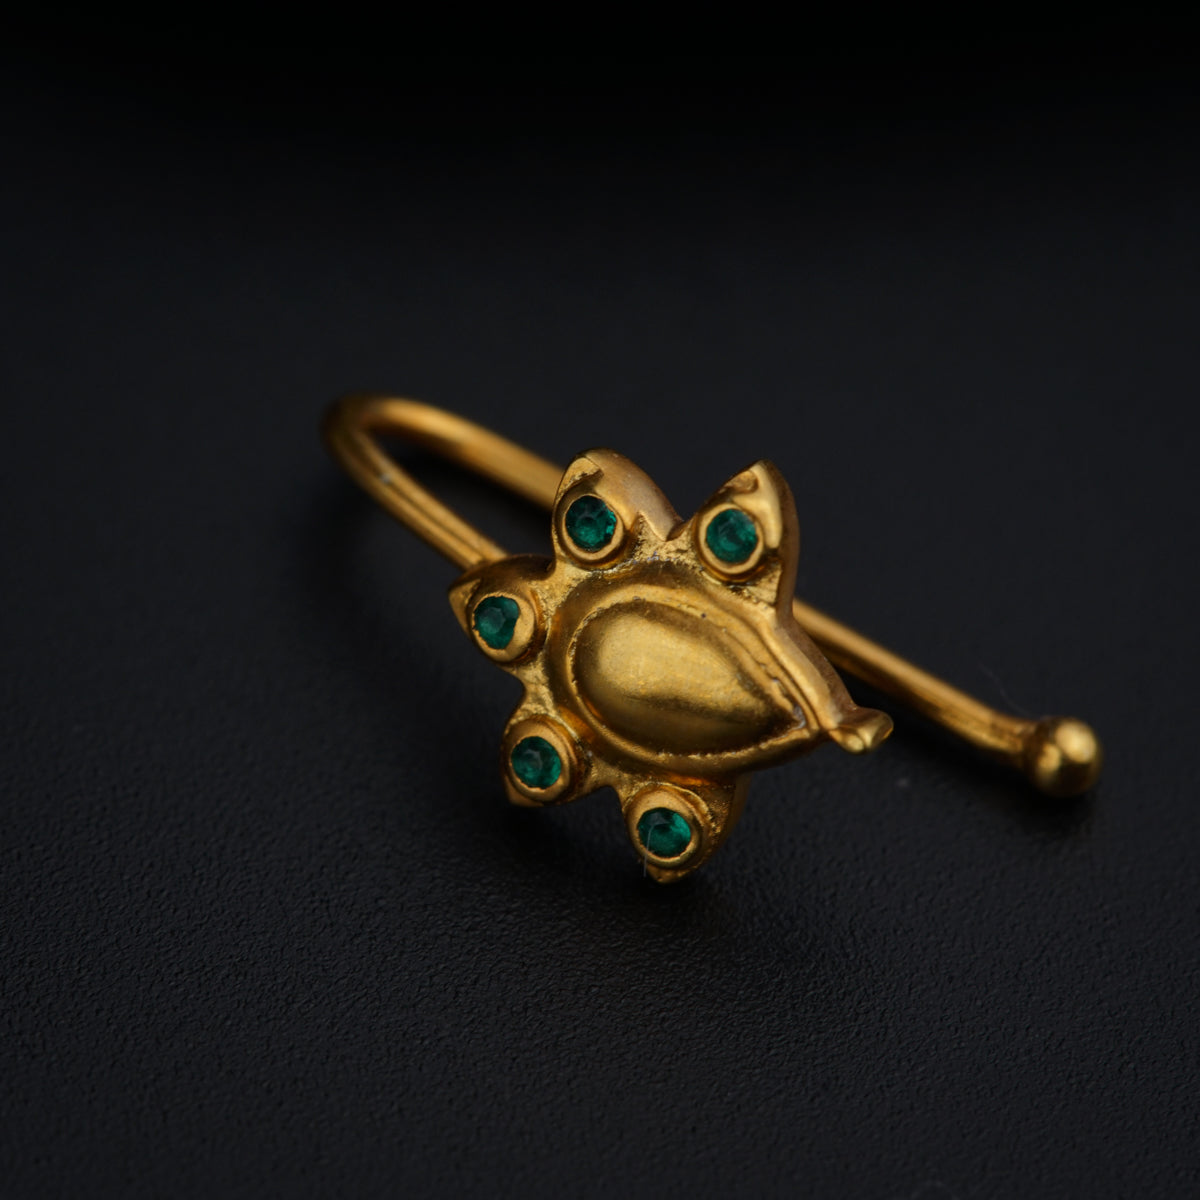 a close up of a gold ring with green stones